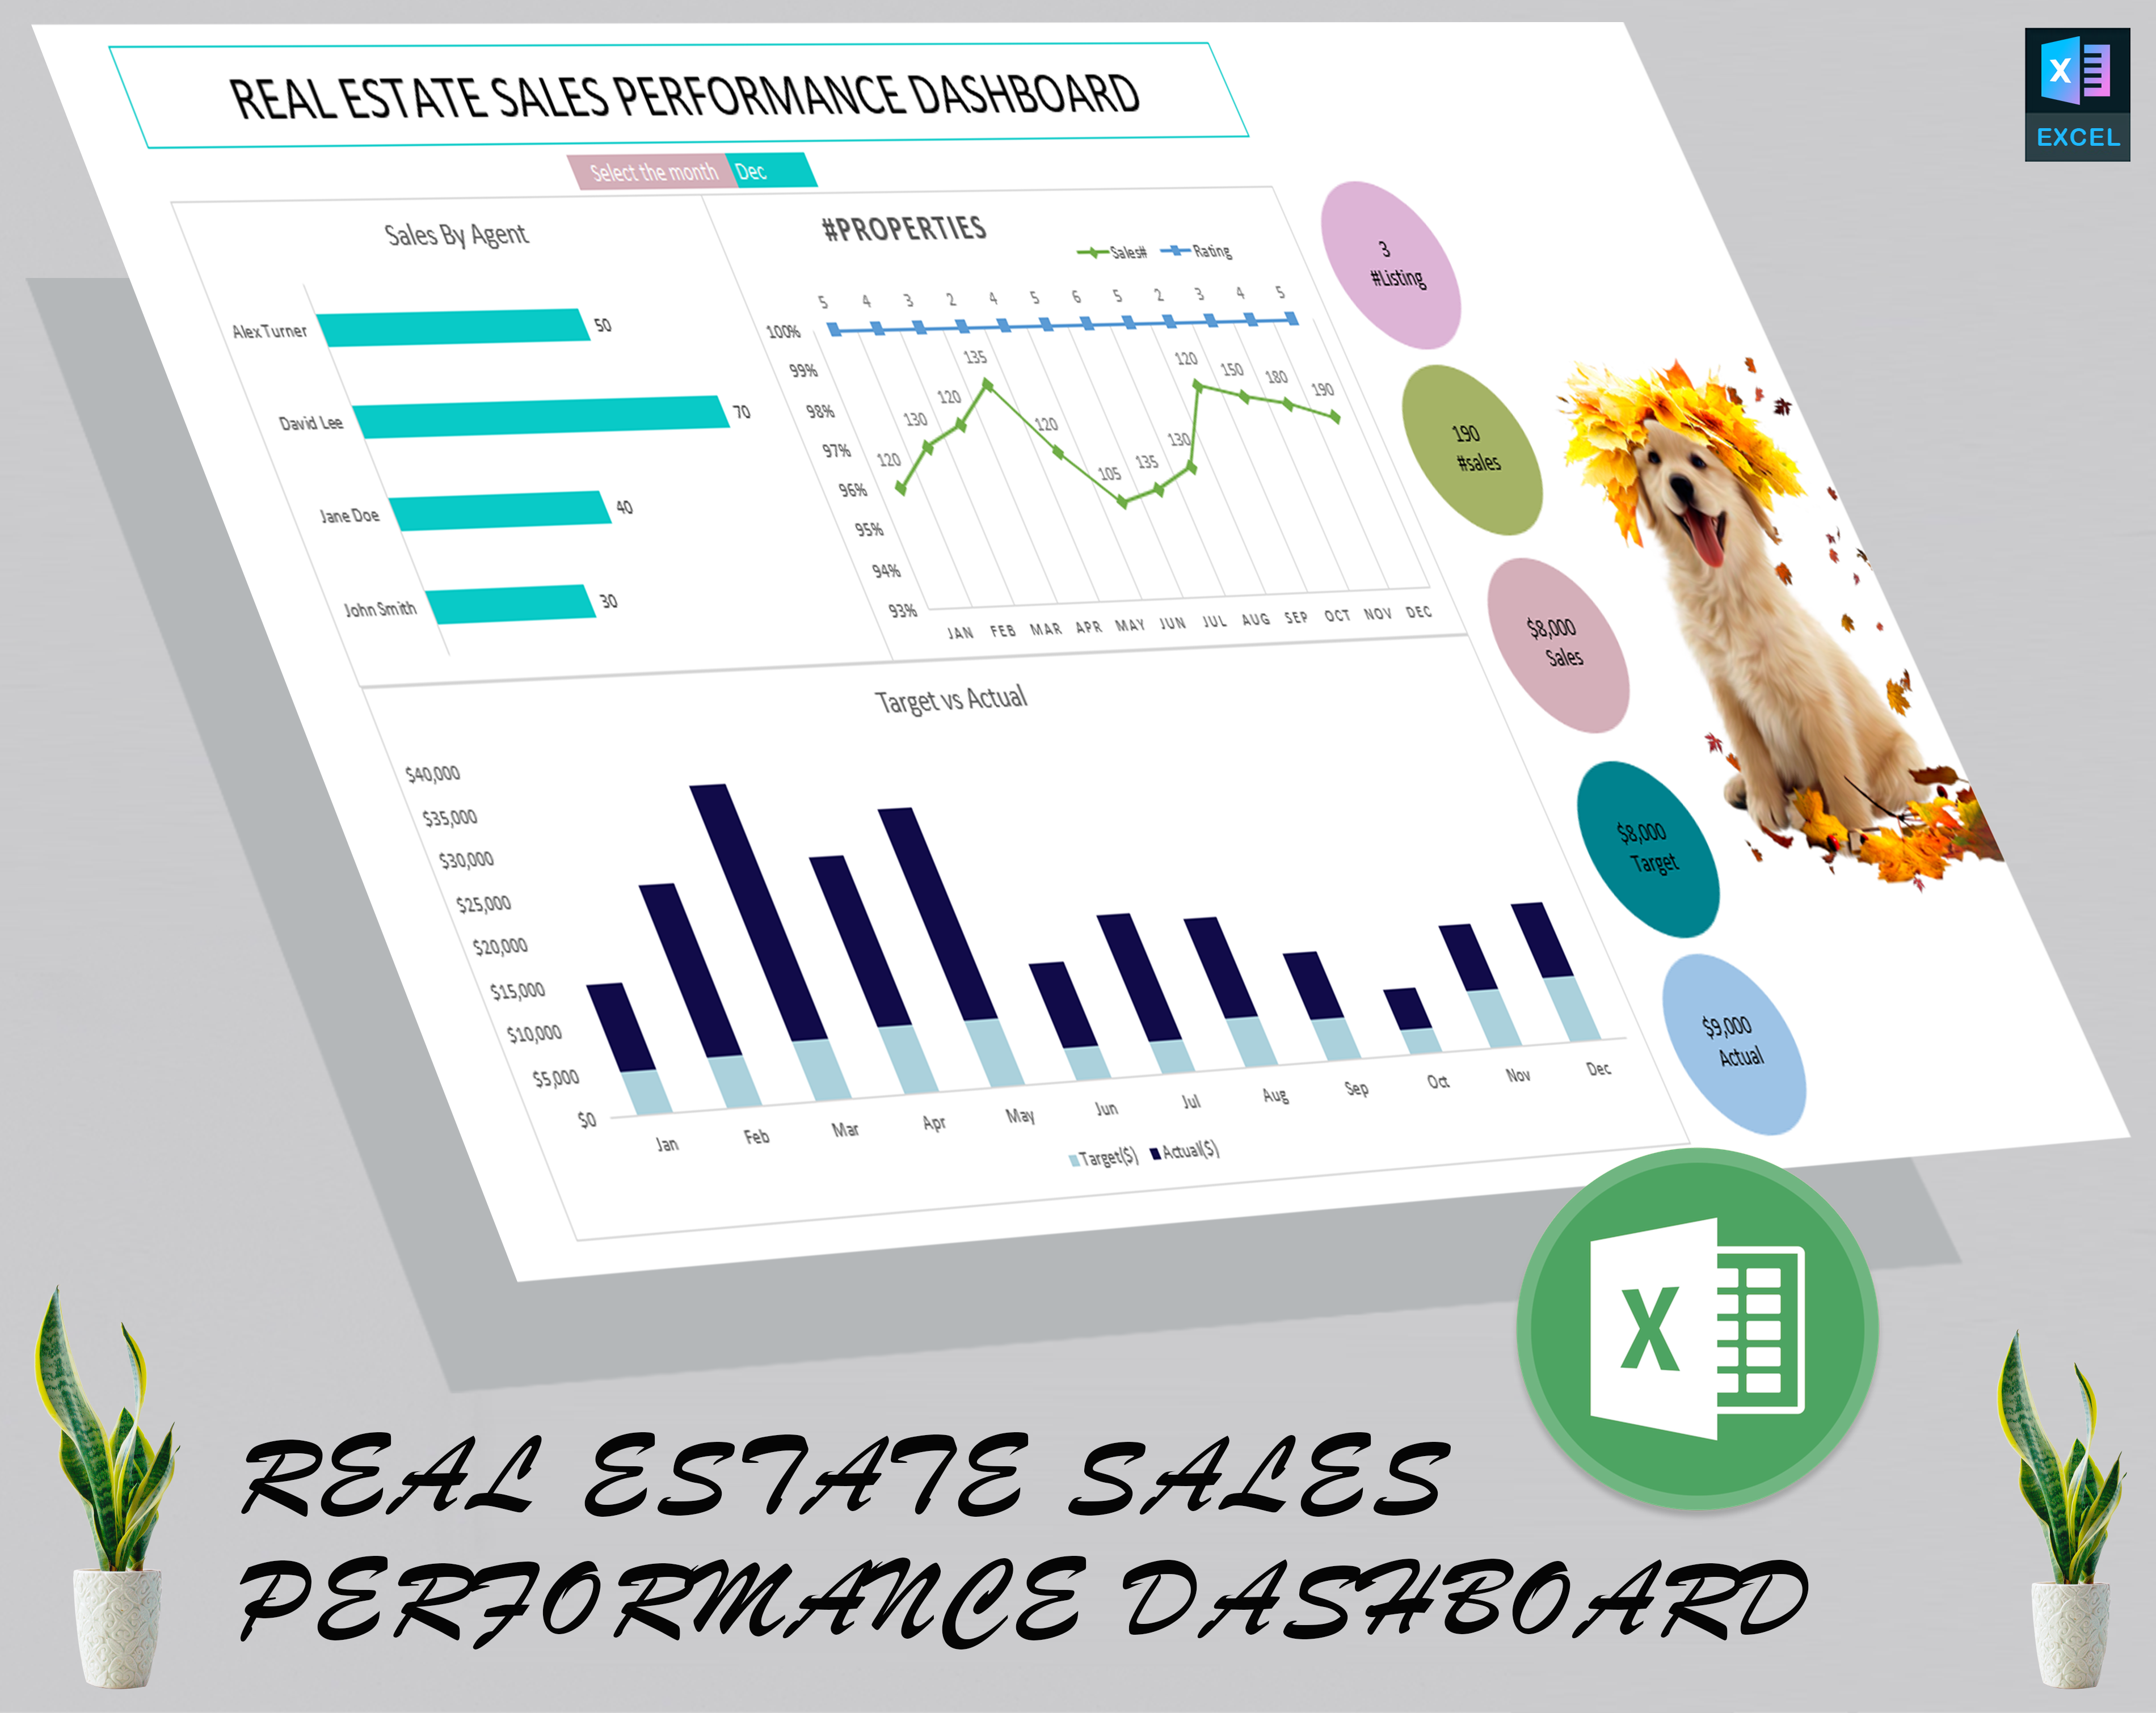 Real estate sales performance dashboard